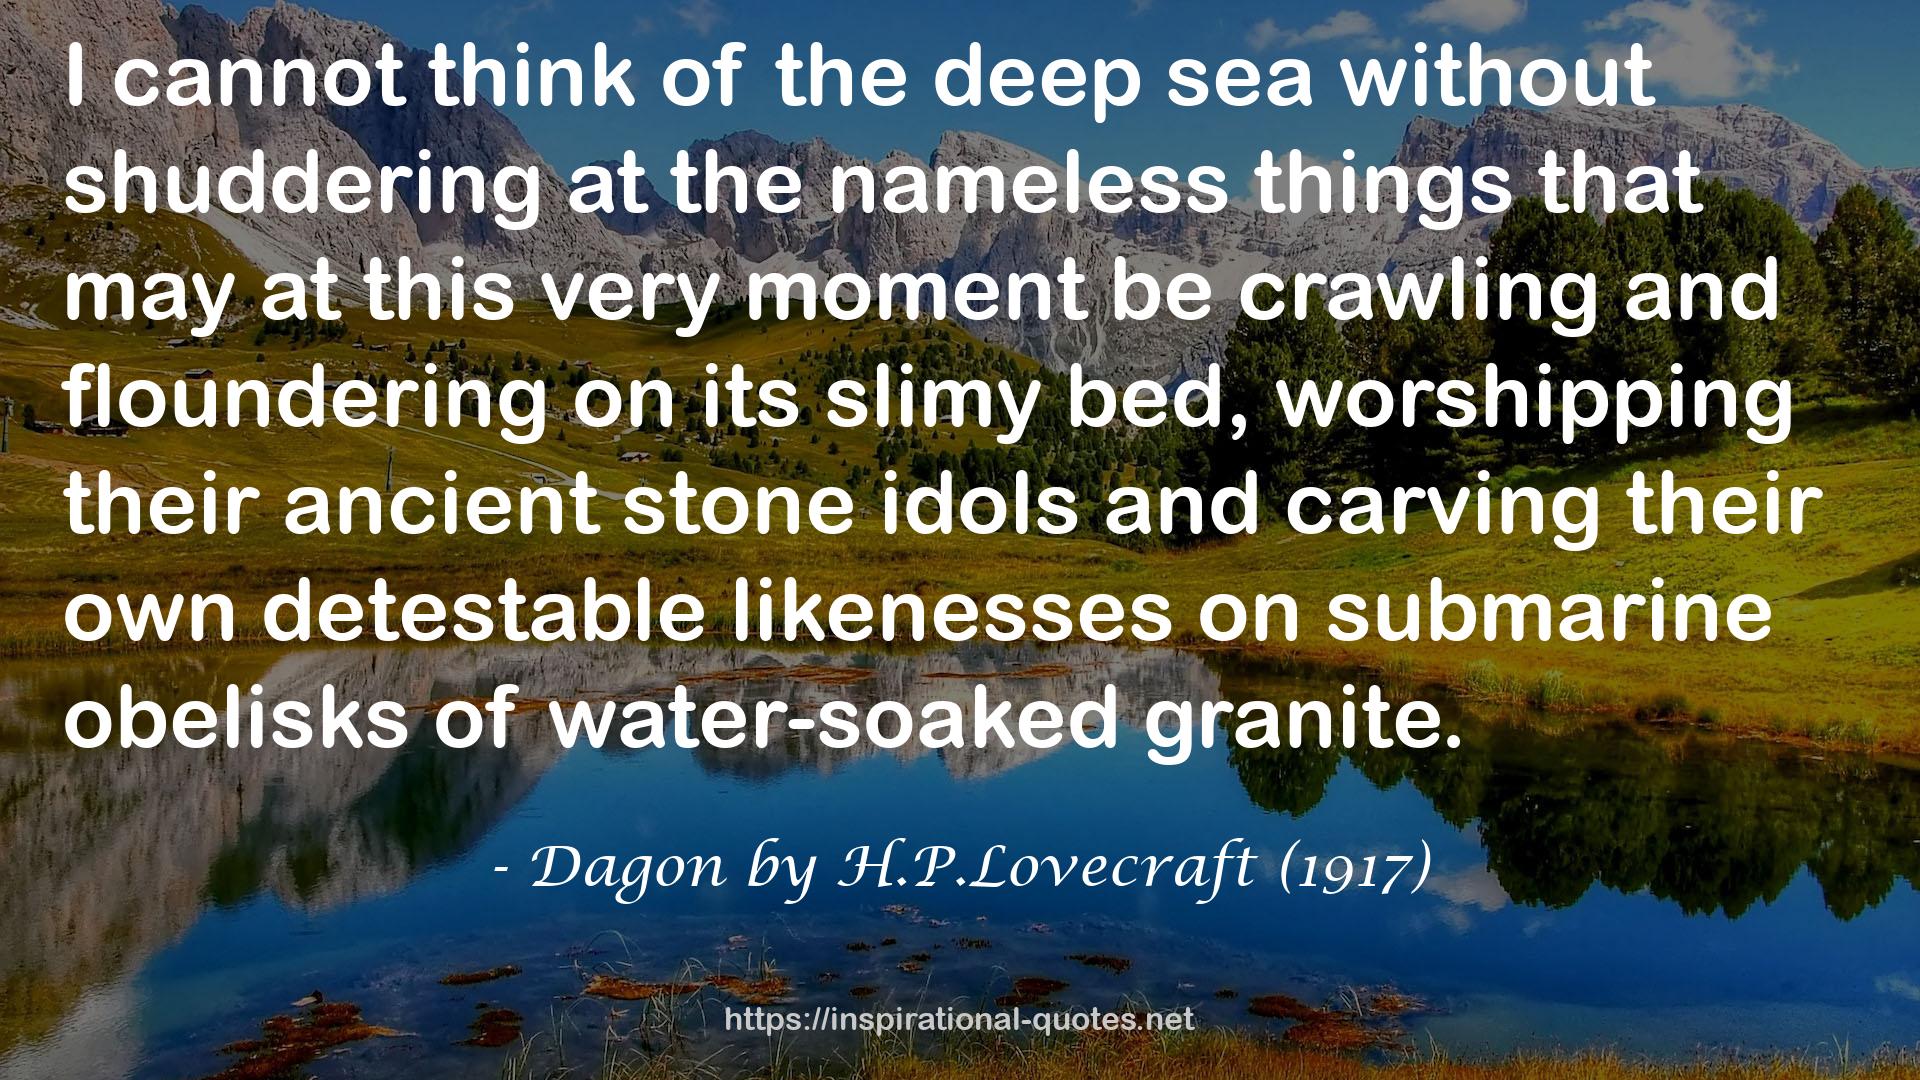 Dagon by H.P.Lovecraft (1917) QUOTES